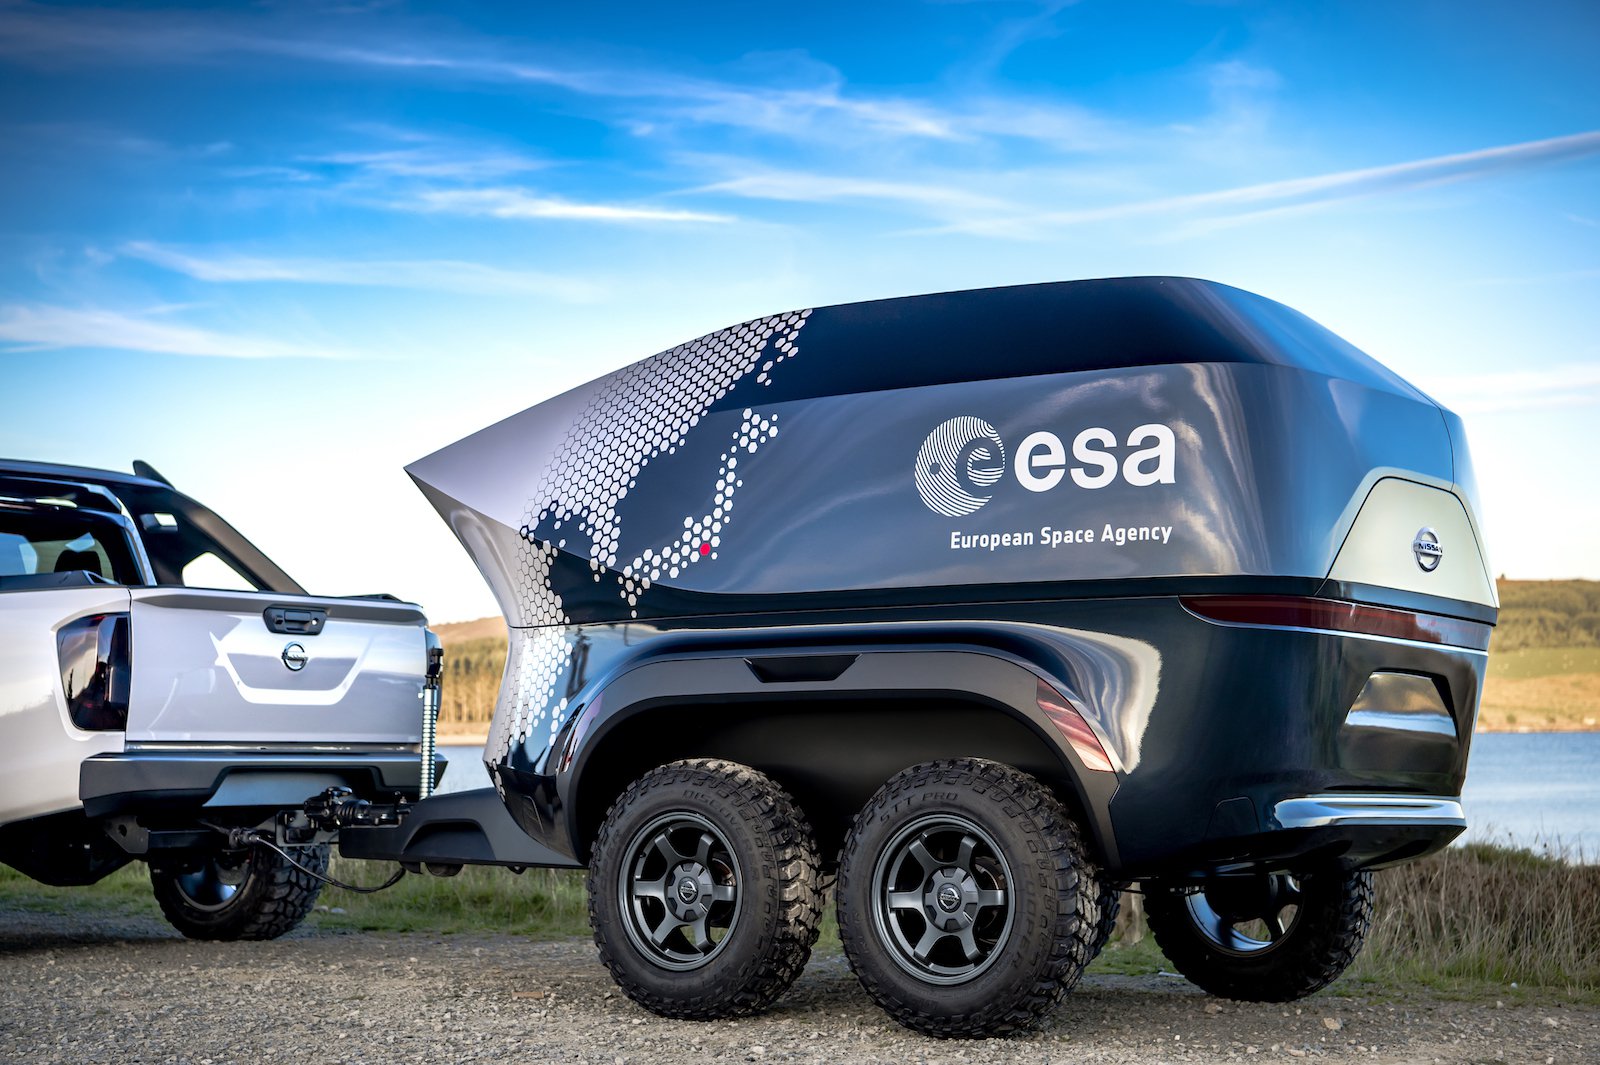 Nissan and ESA presented the SUV for astronomers, equipped with a telescope